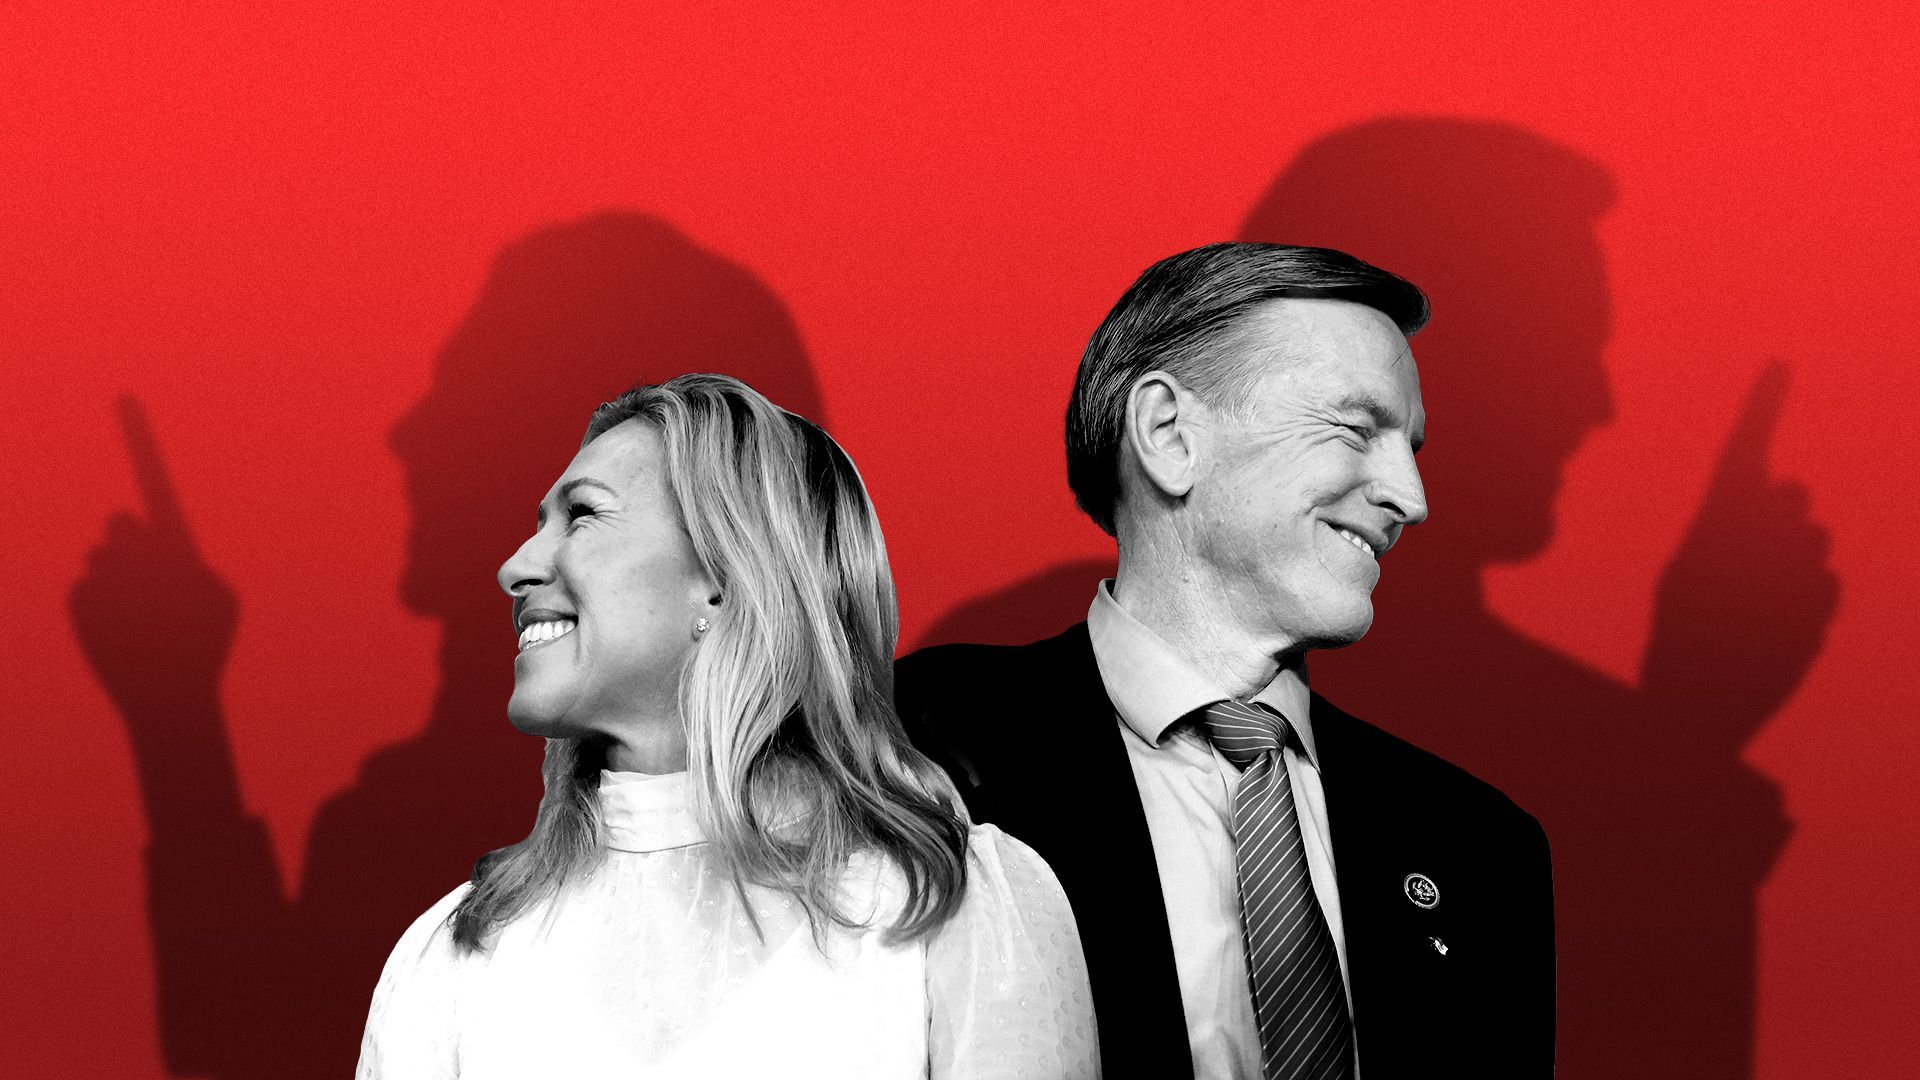 Photo illustration of Rep. Marjorie Taylor Greene (R-GA) and Rep. Paul Gosar (R-AZ) casting shadows with fingers held up